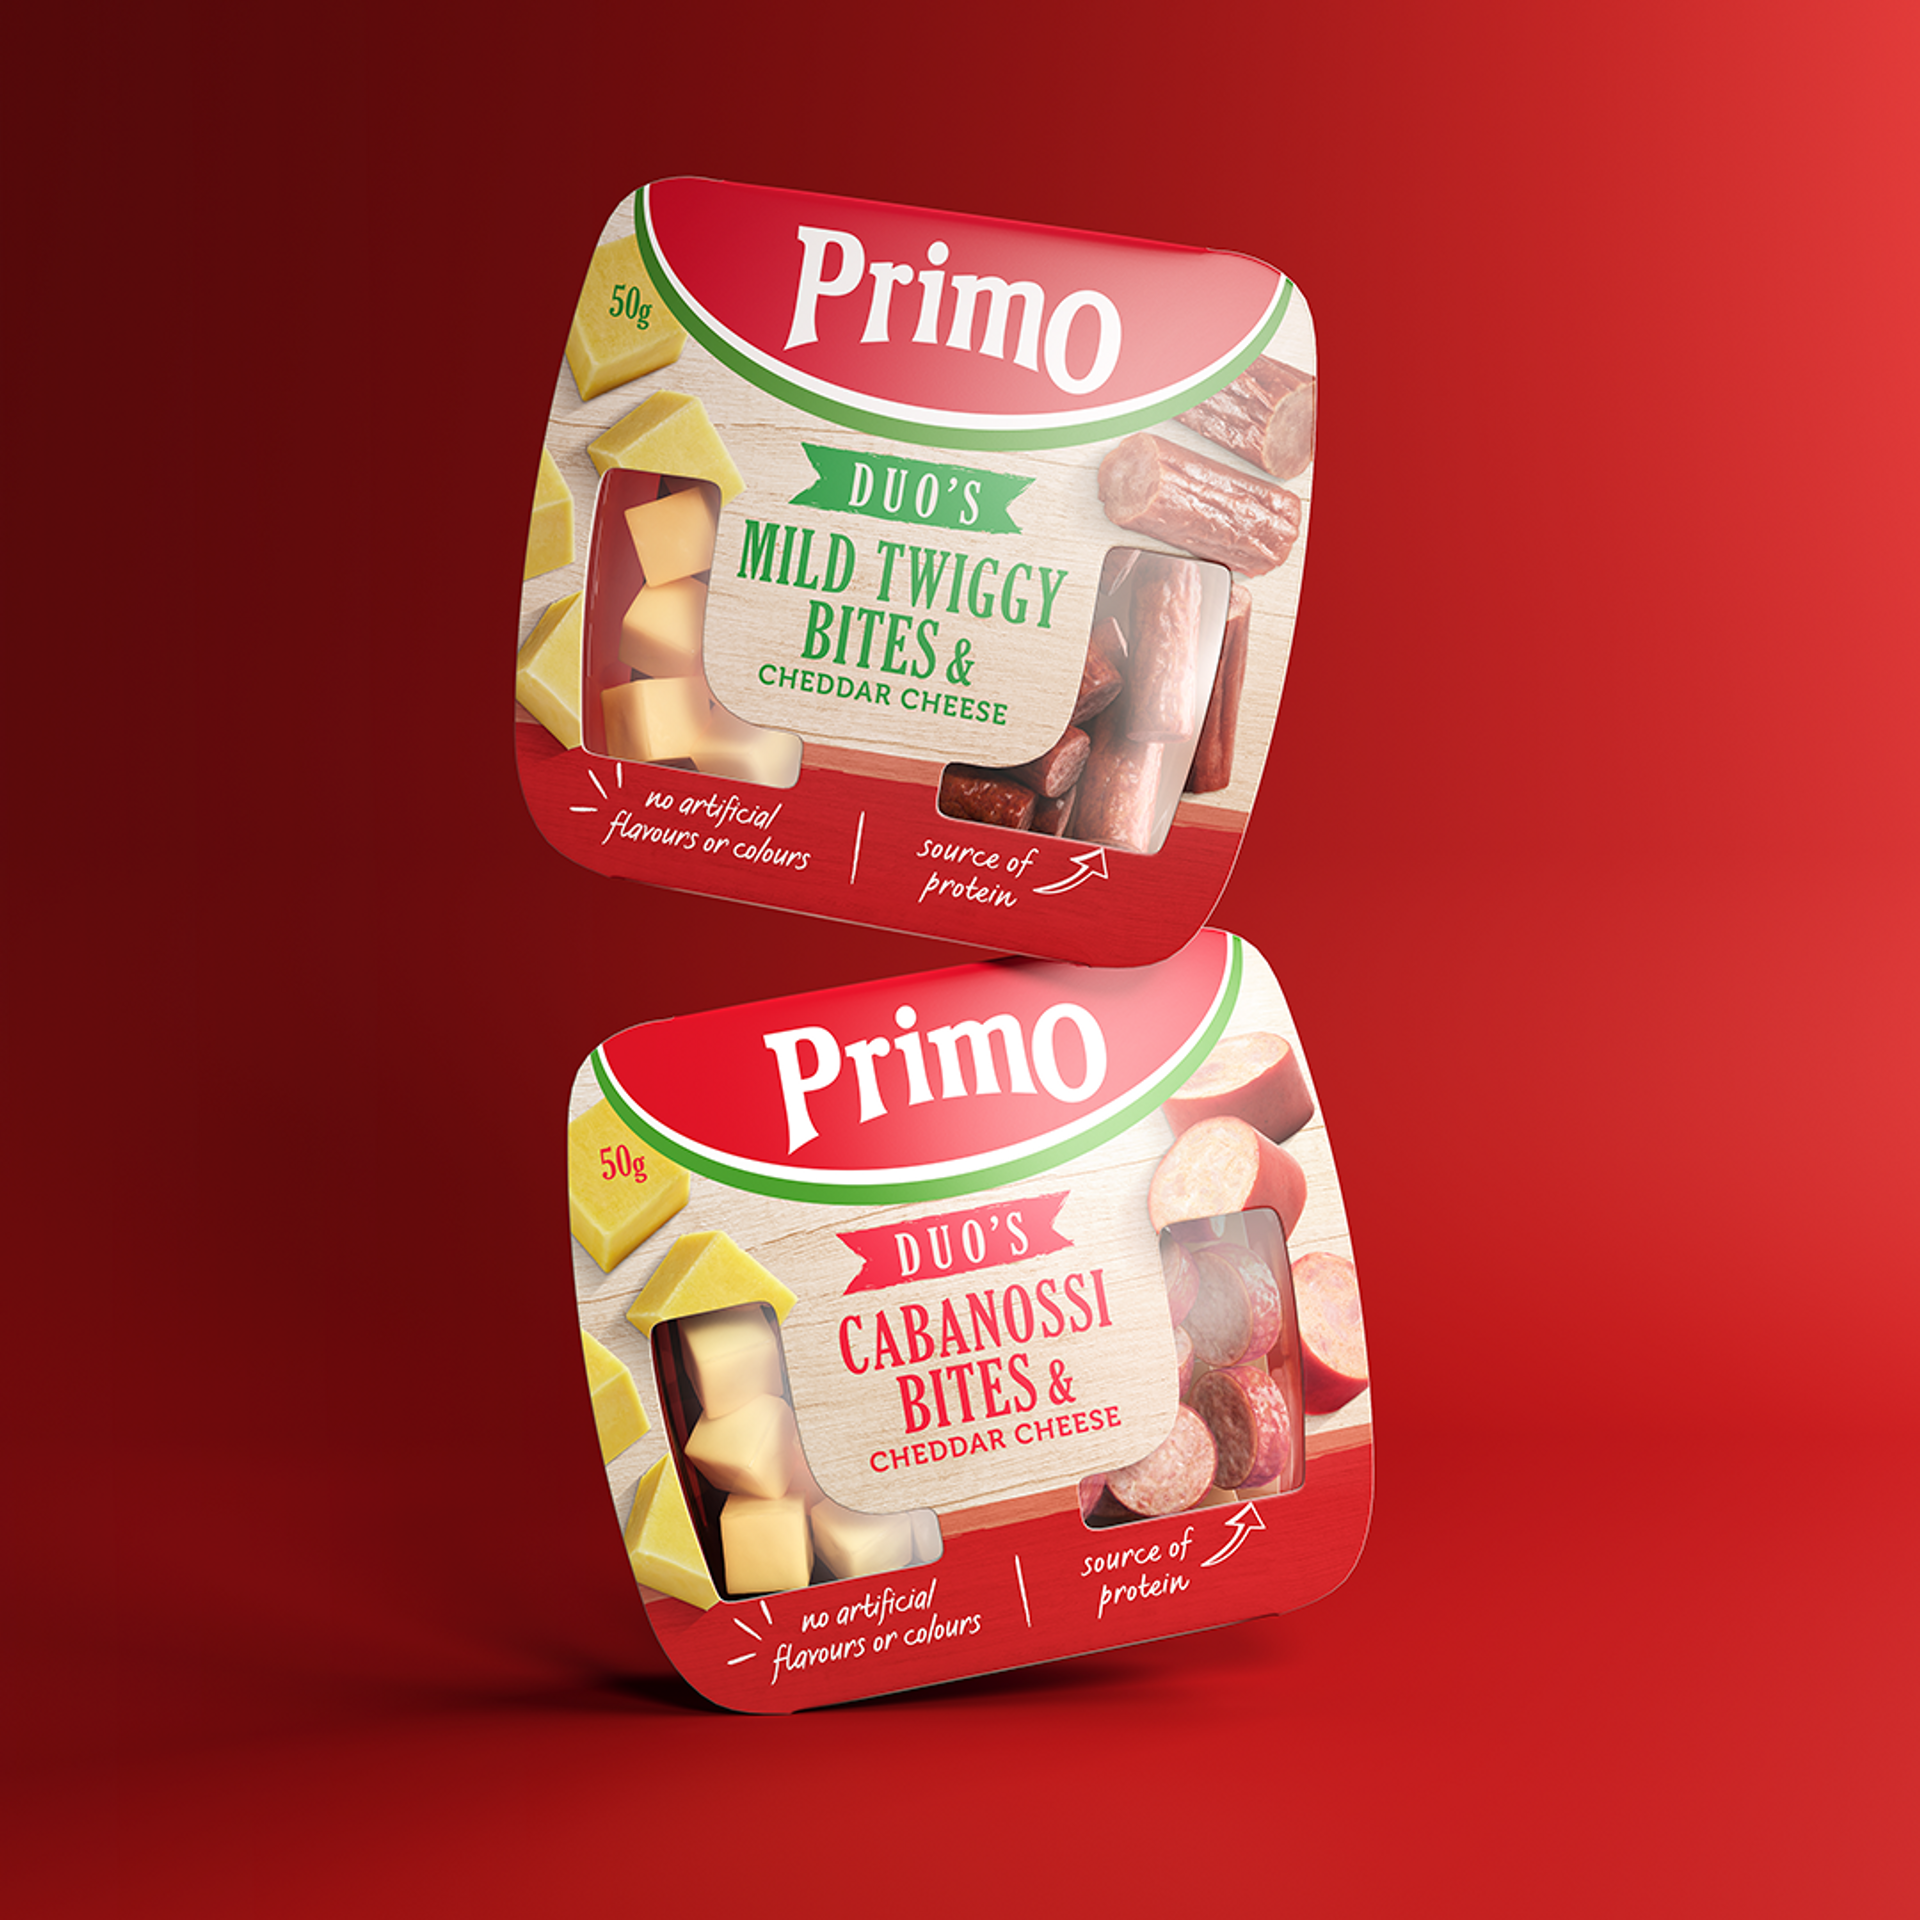 Primo Packaging design by design agency Our Revolution for Primo’s meat snacks Mild Twiggy Bites and Cabanossi Bites Duo’s